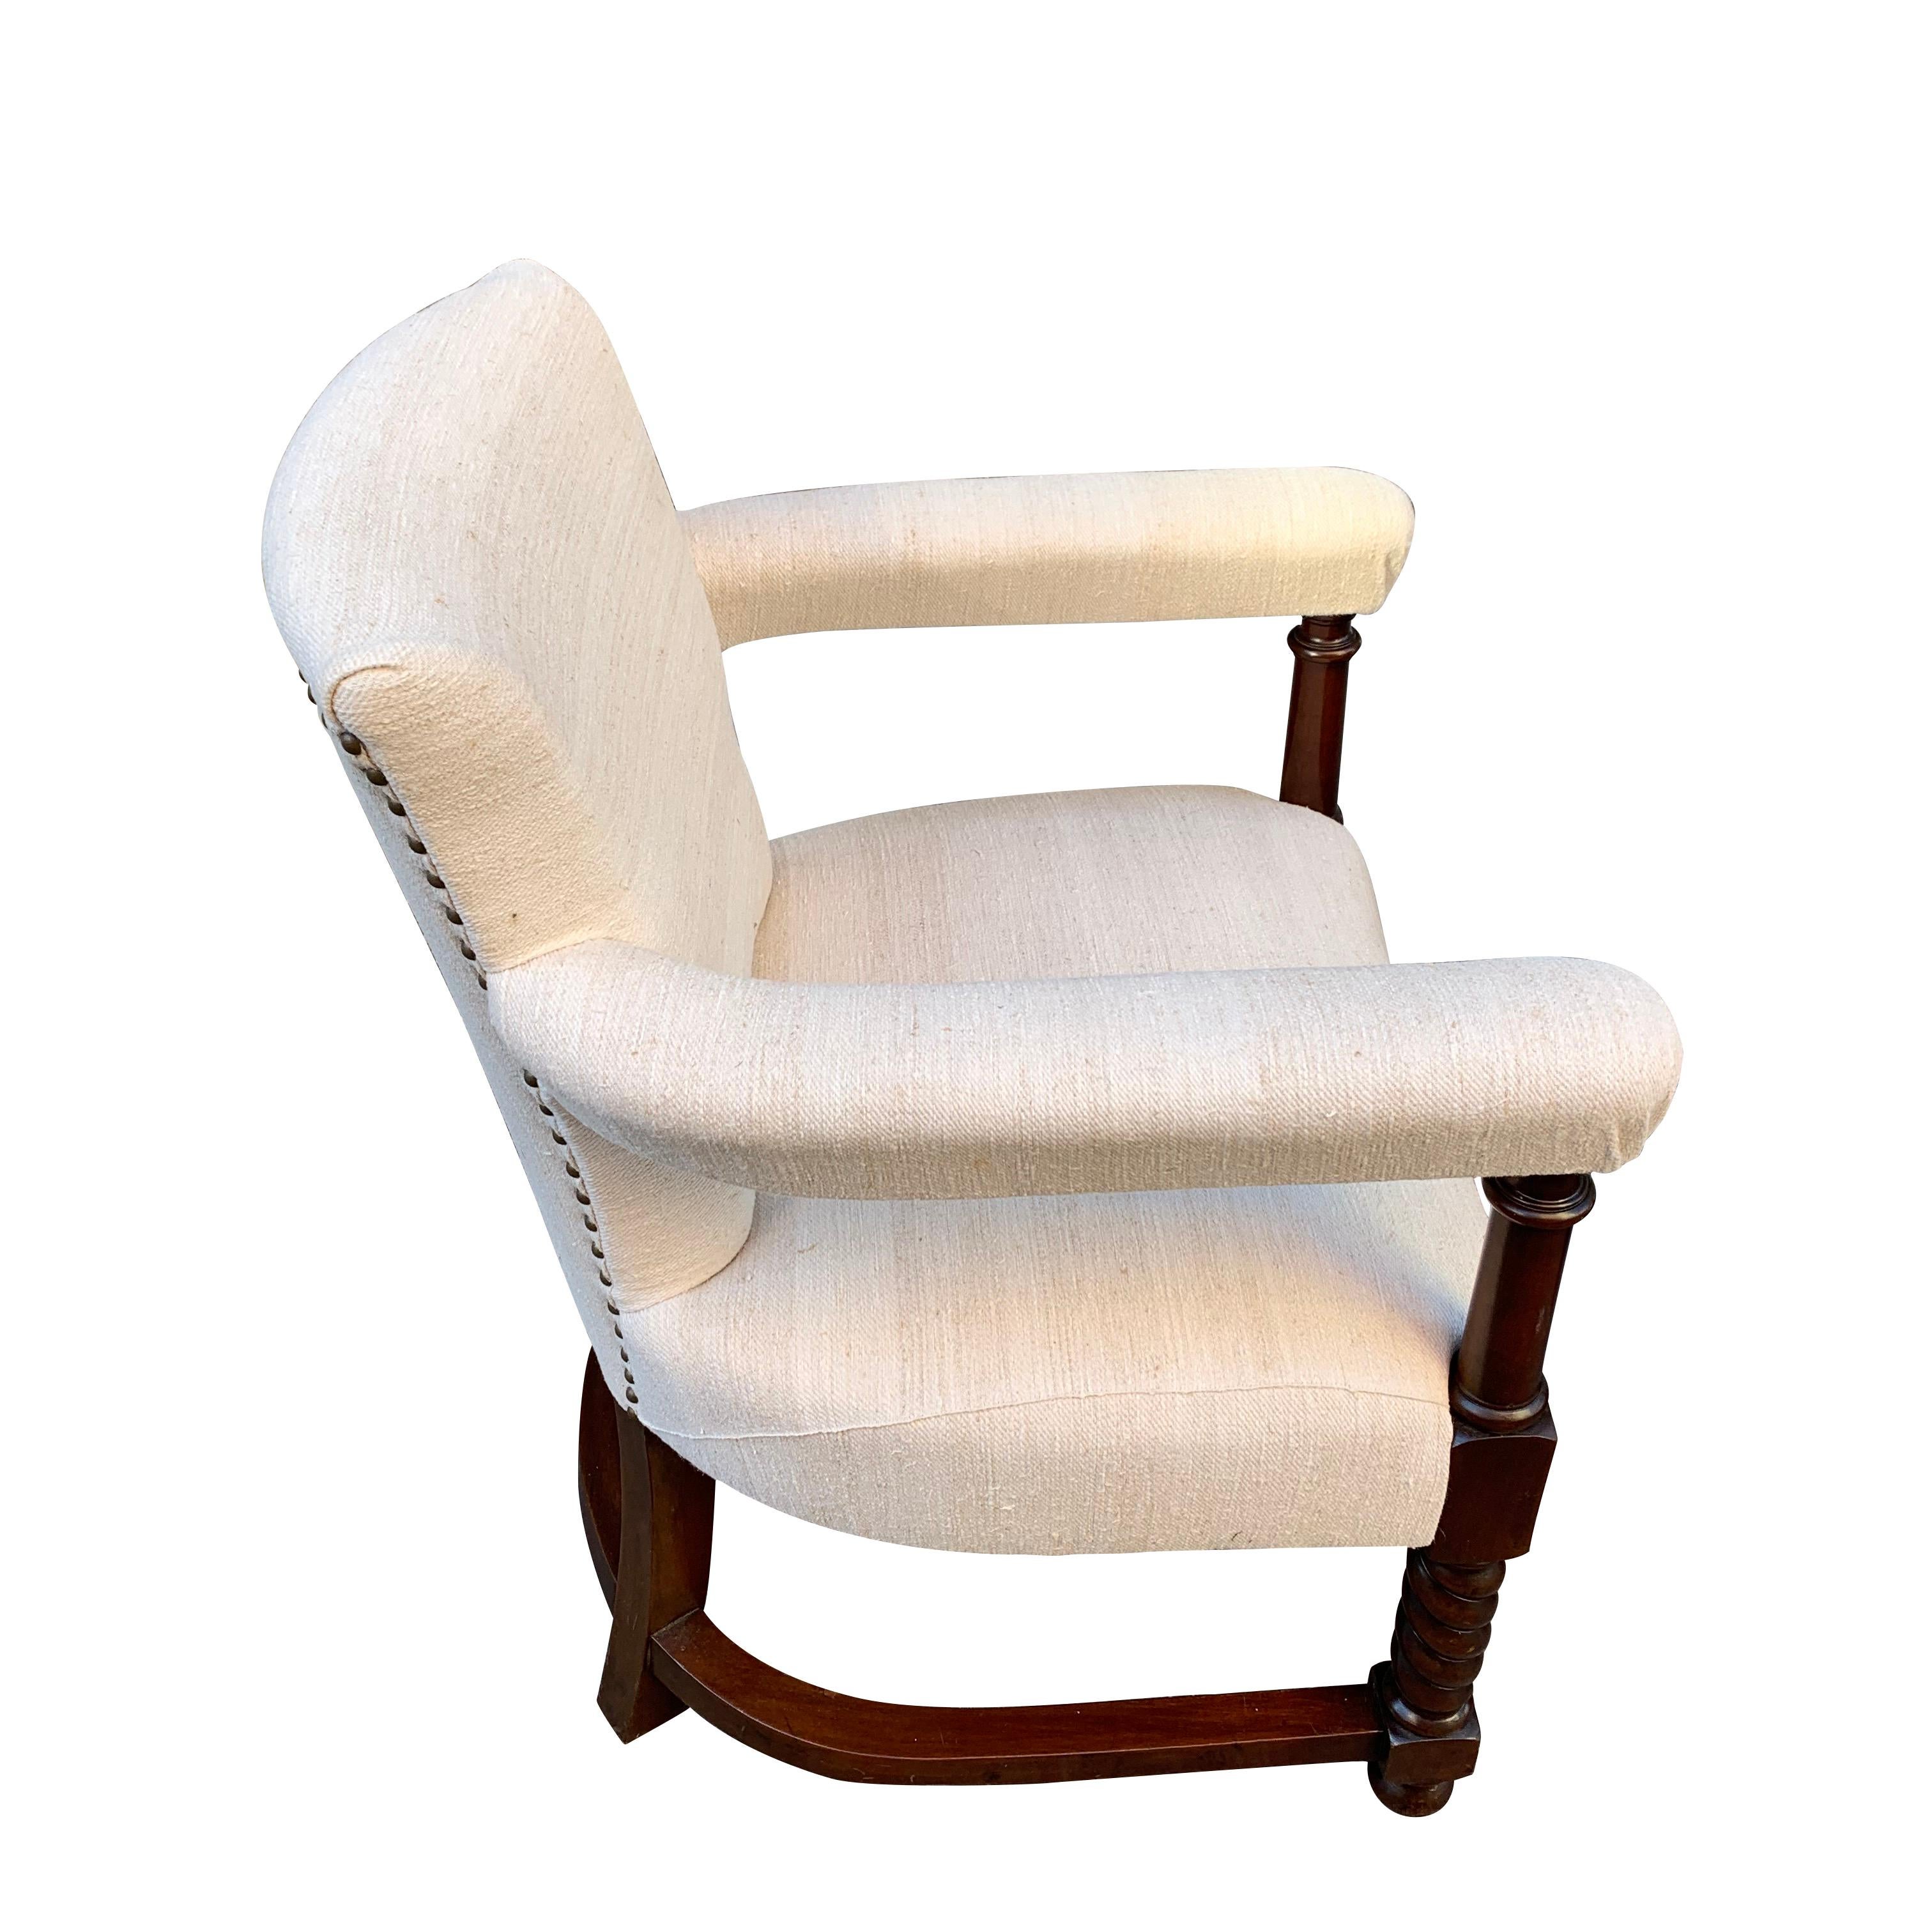 This pair of 19th century Scottish upholstered club chairs possess beautifully curved horseshoe shaped arms. 
This shape is repeated on the curvature of the stretcher connecting the legs.
The oak chairs are very comfortable and newly reupholstered